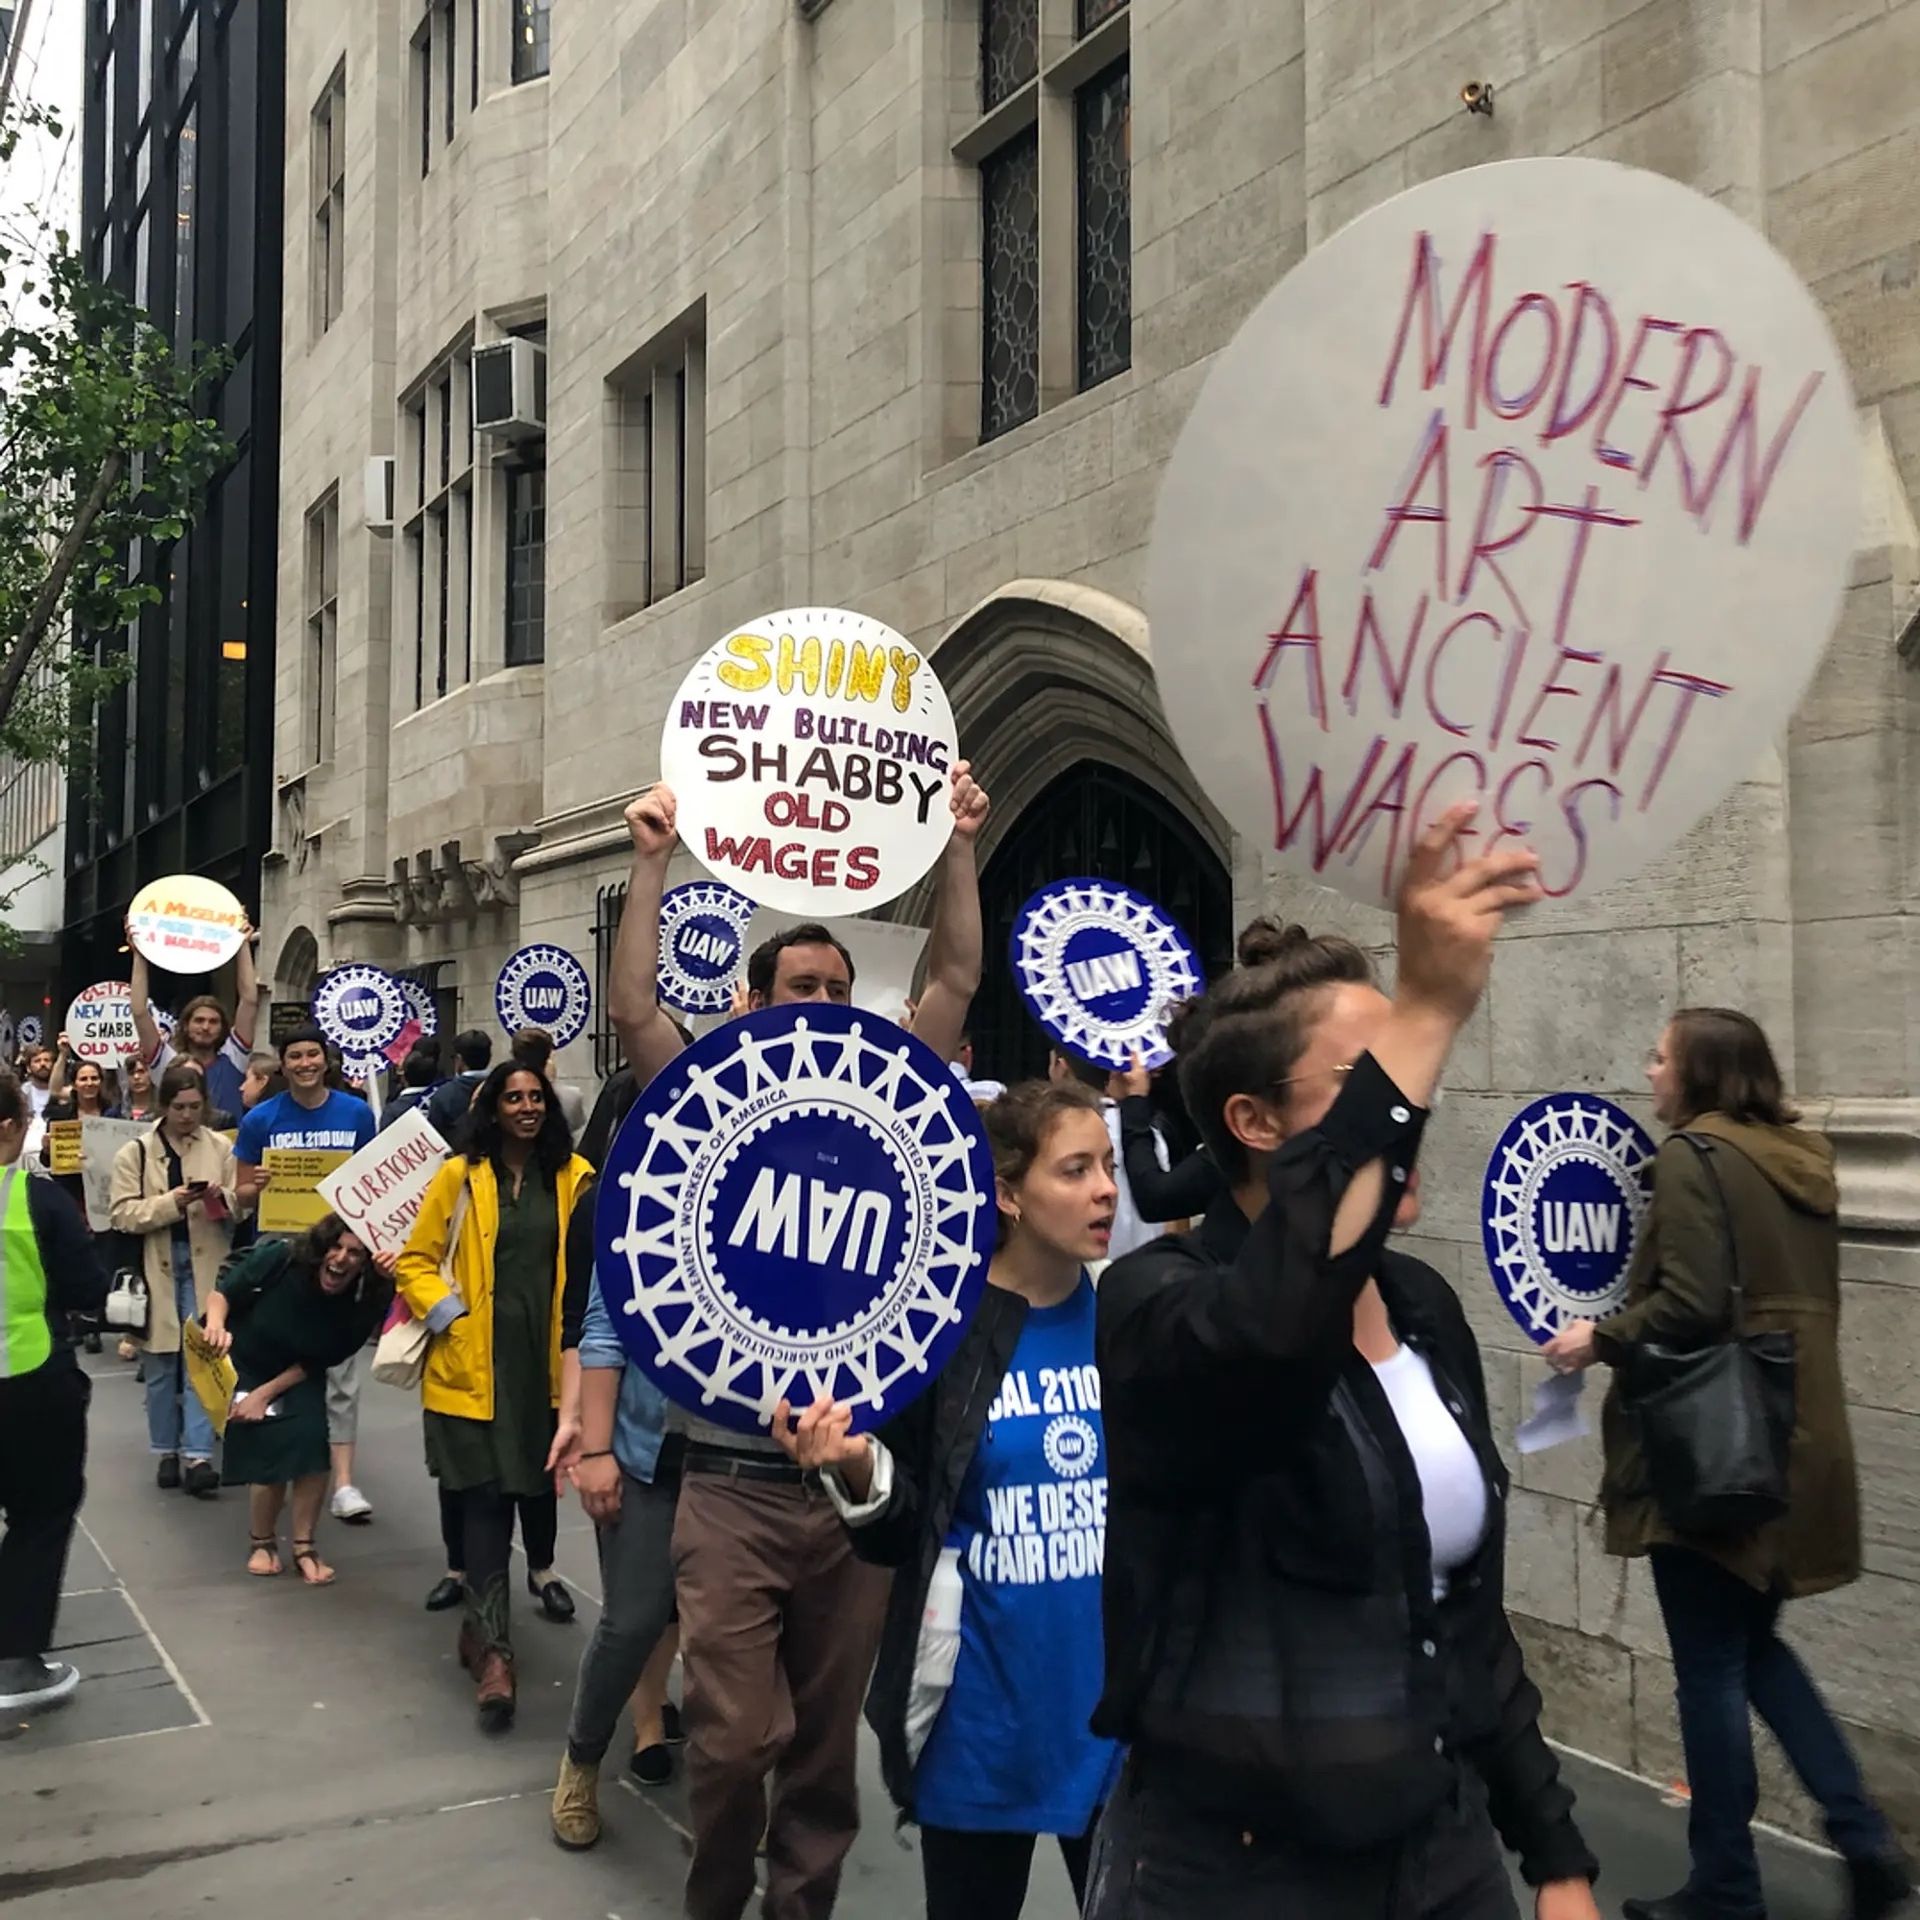 Unionised workers of the Museum of Modern Art and their supporters rally outside the New York museum in 2018 @momalocal2110 via Instagram